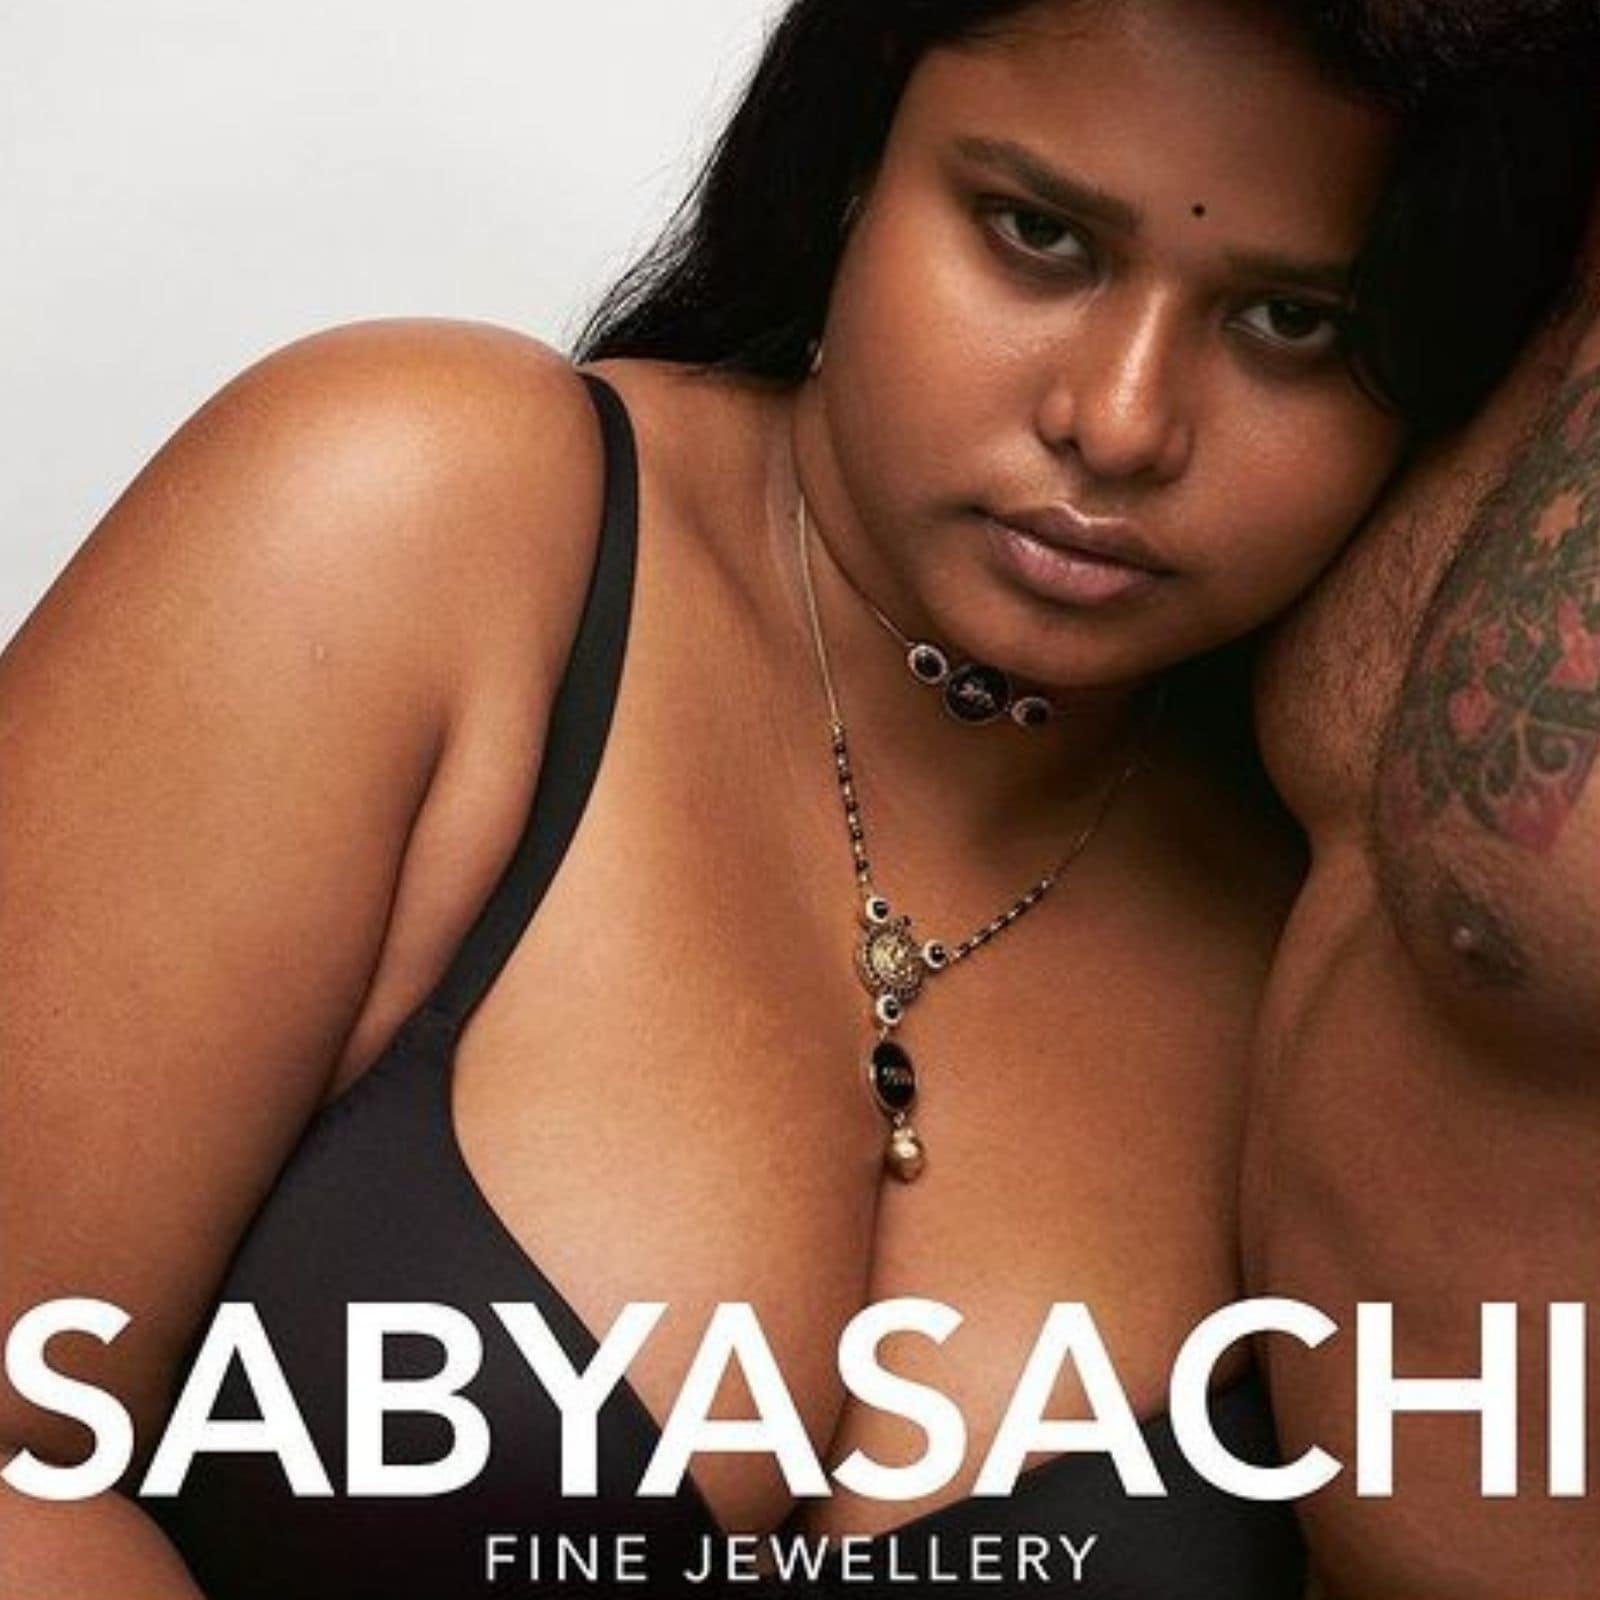 Karinakapur Pron Vide Hdo - Sabyasachi's New Campaign Faces Flak For Featuring Mangalsutra as 'Fashion  Jewellery'